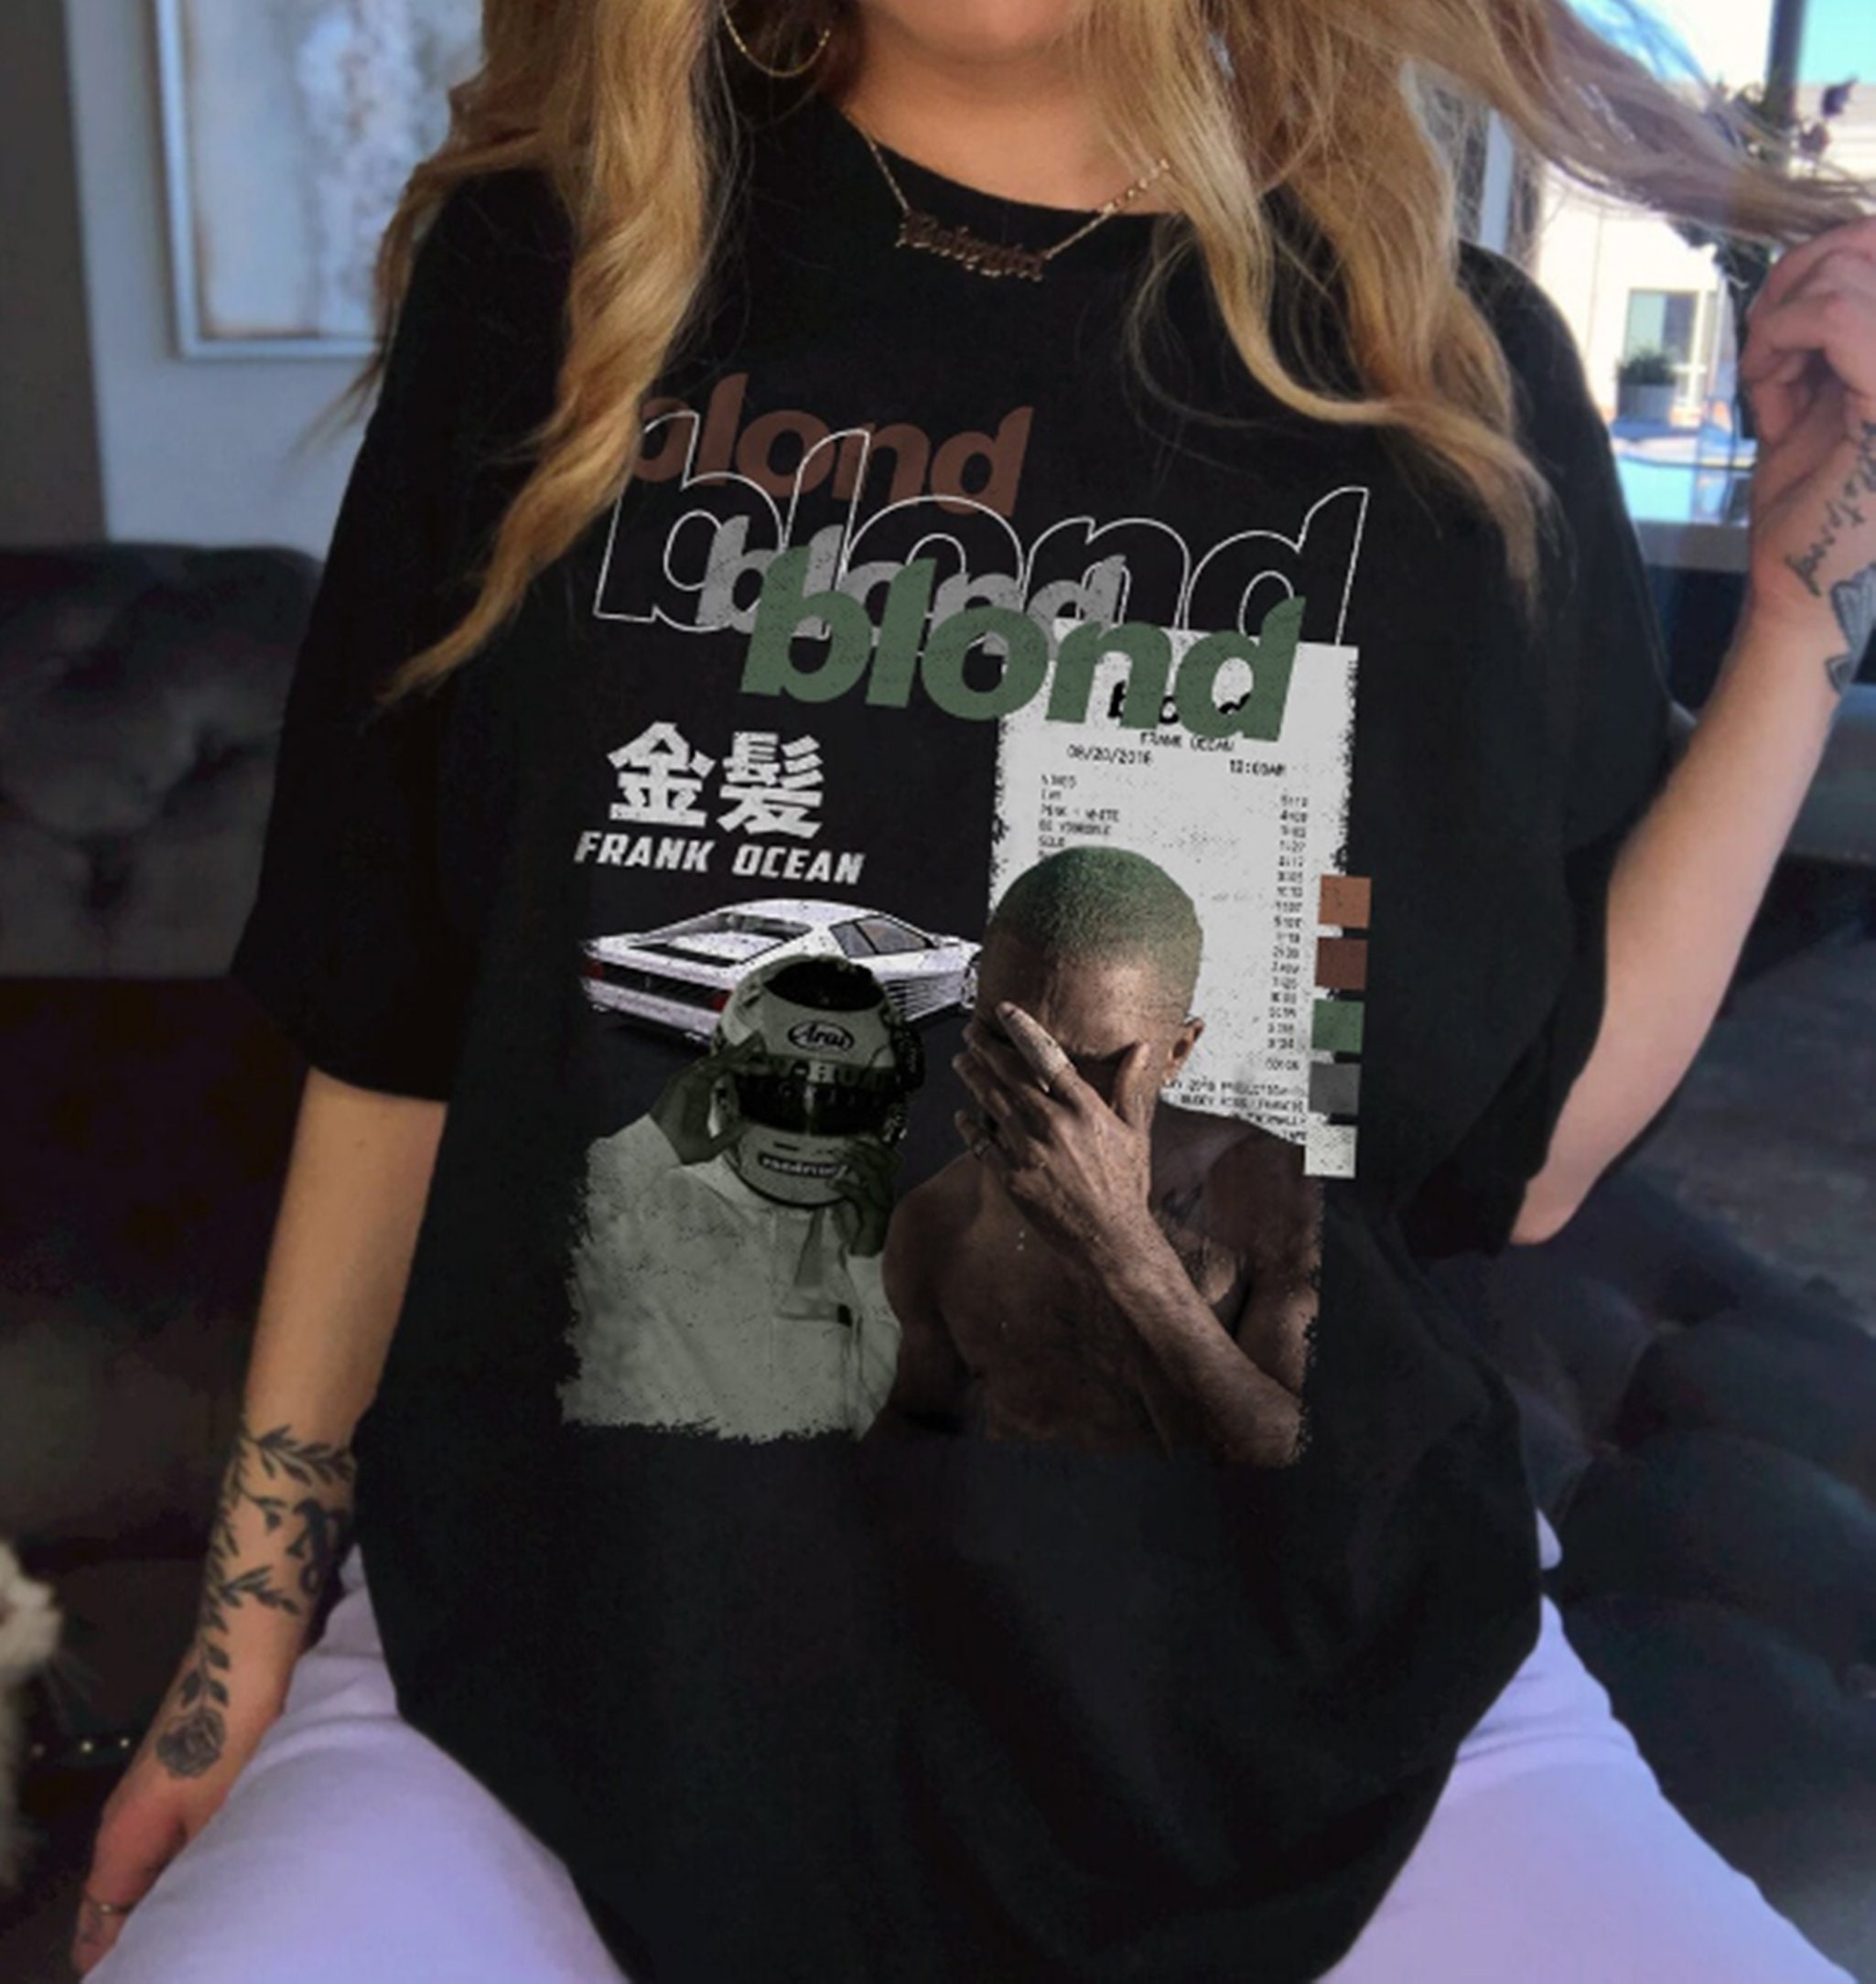 Discover Frank Ocean Blond Vintage Graphic Tshirt - Album Cover Vintage Graphic Tee